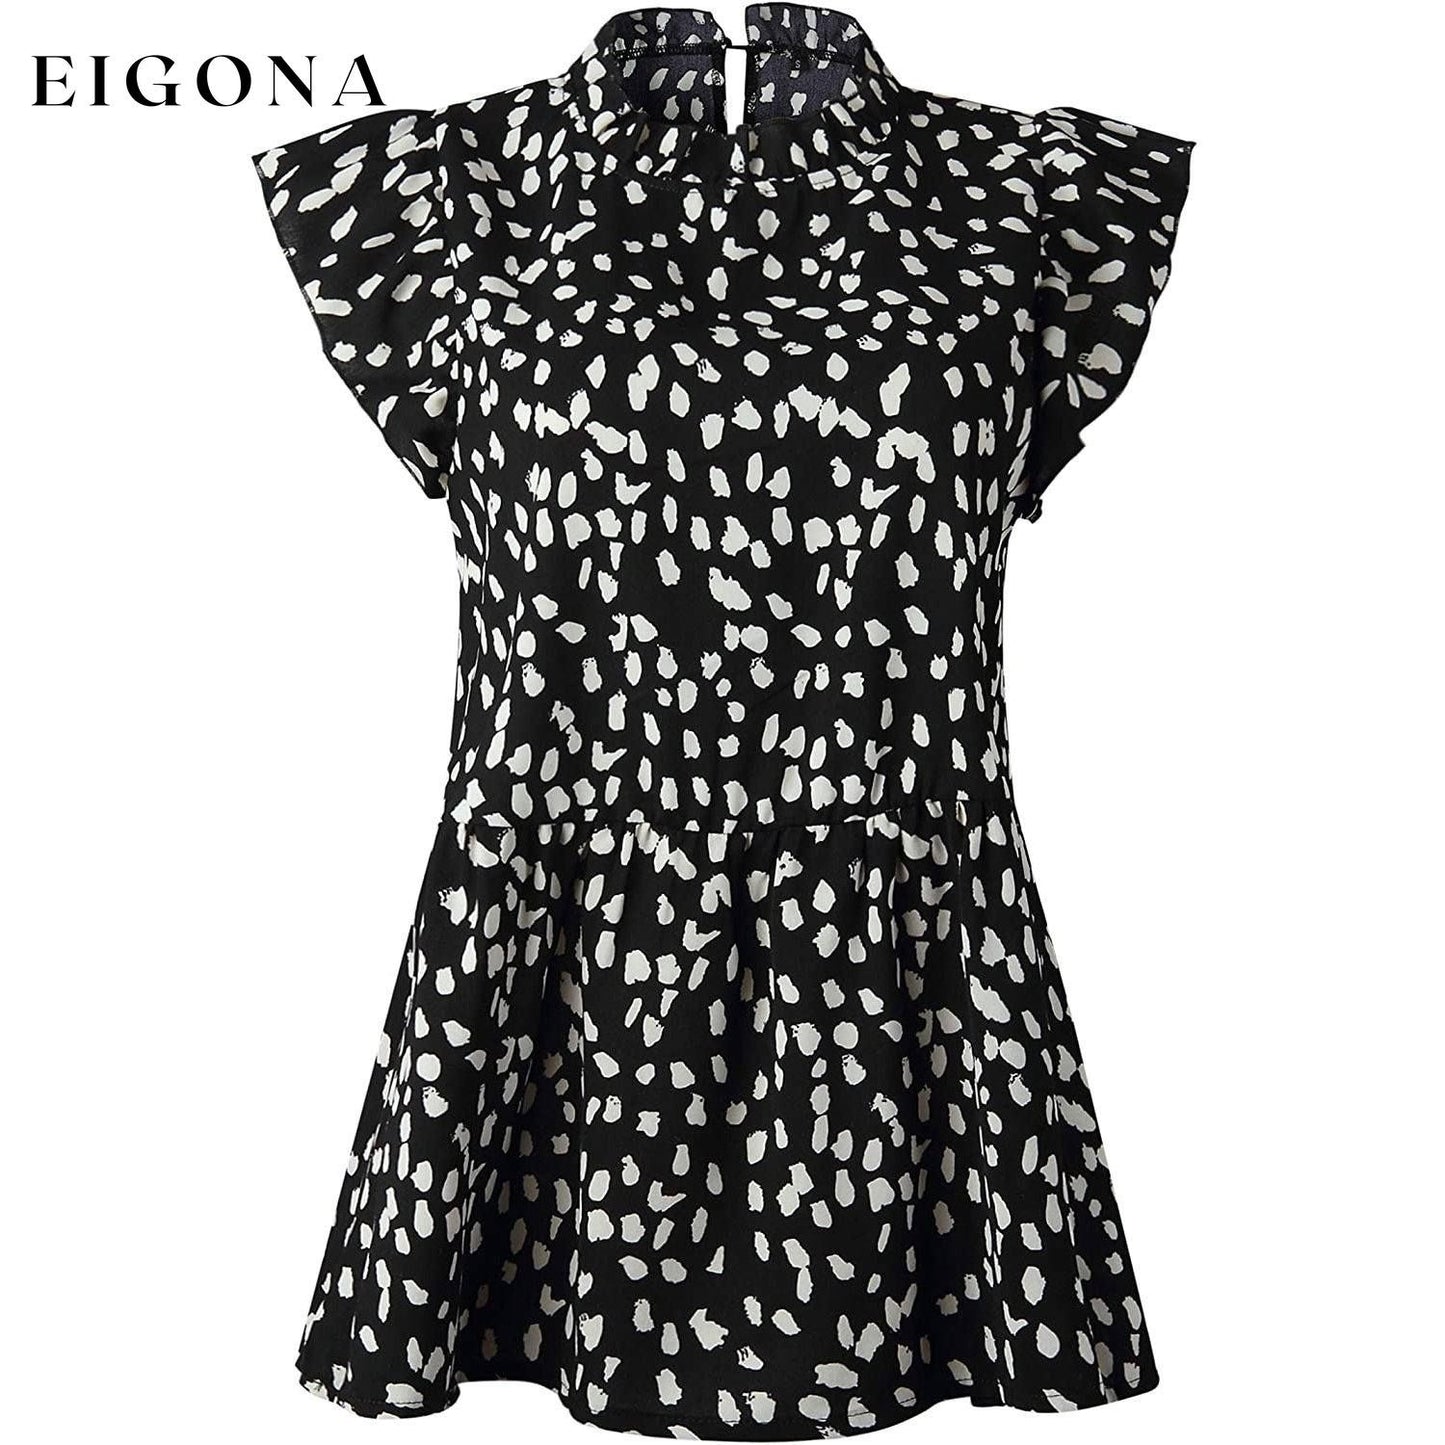 Women's Casual Floral Print Babydoll Blouse Tunic Tops __stock:200 __stock:500 clothes Low stock refund_fee:800 tops